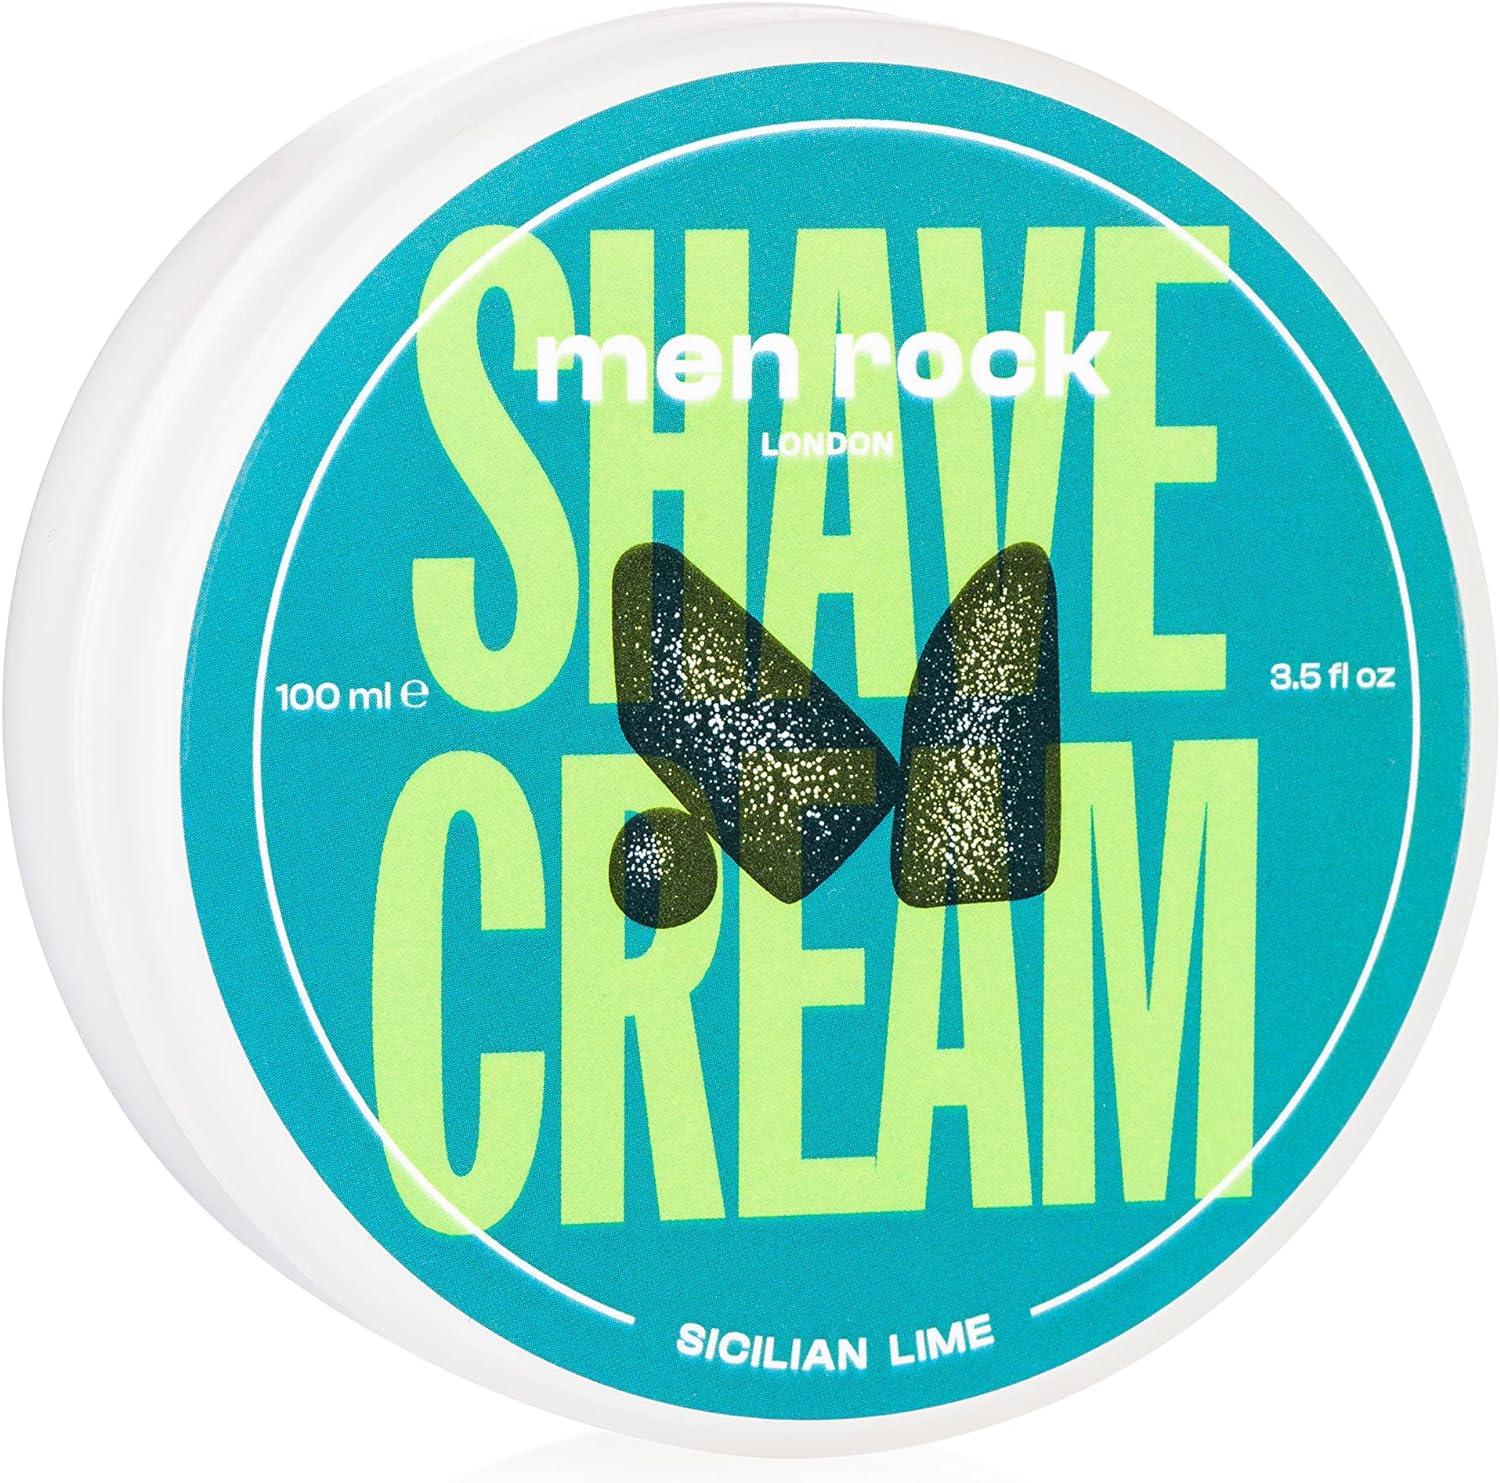 Men Rock Sicilian Lime Shave Cream for a Classy Wet Shaving Experience, Deeply Hydrates and Nourishes Skin, Cruelty Free, Zesty Sicilian Lime and Spicy Black Pepper Fragrance 100ml